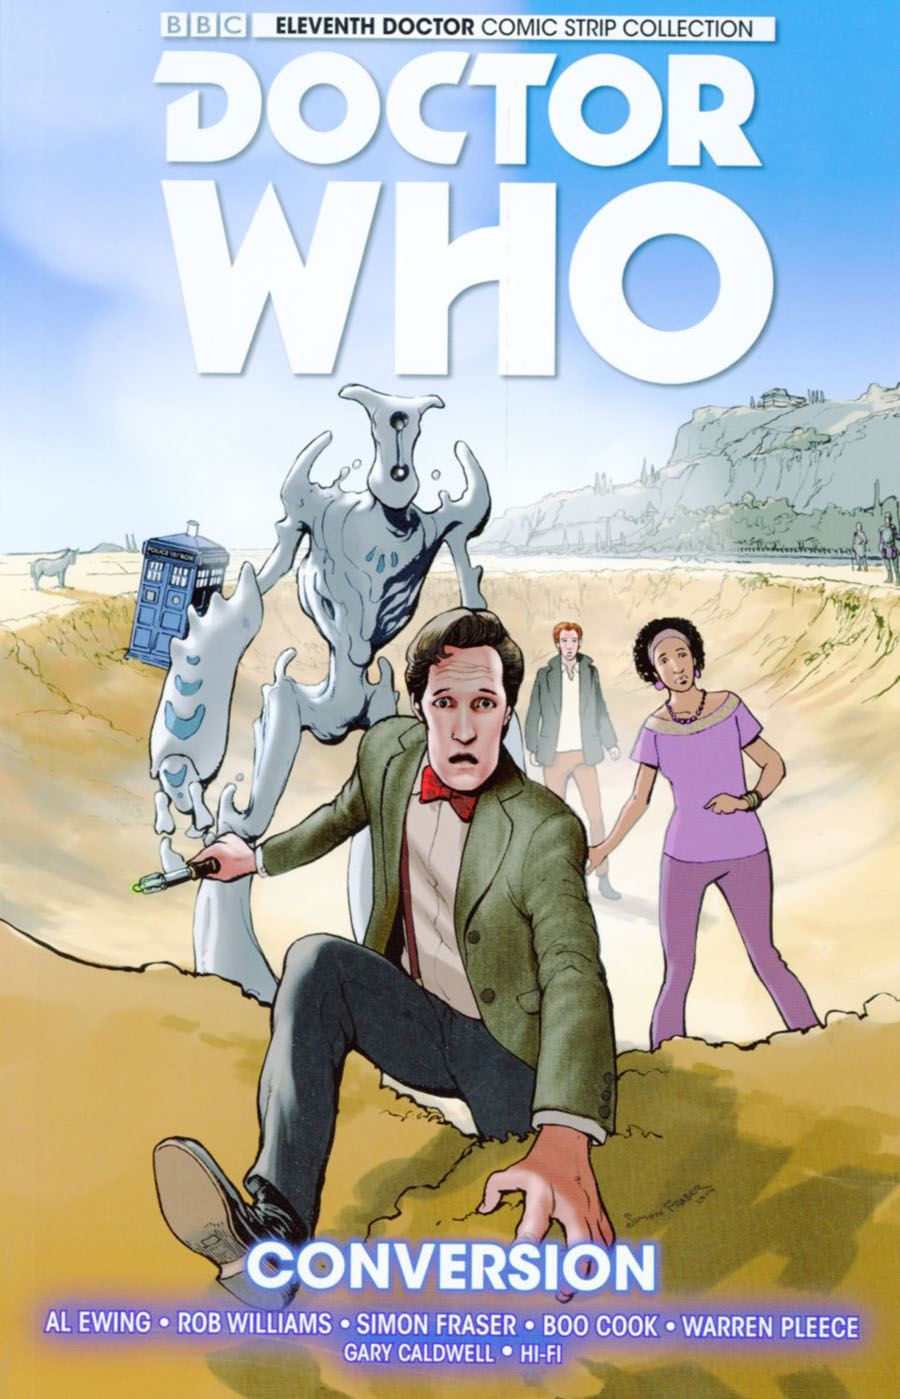 Doctor Who 11th Doctor Vol 3 Conversion TP